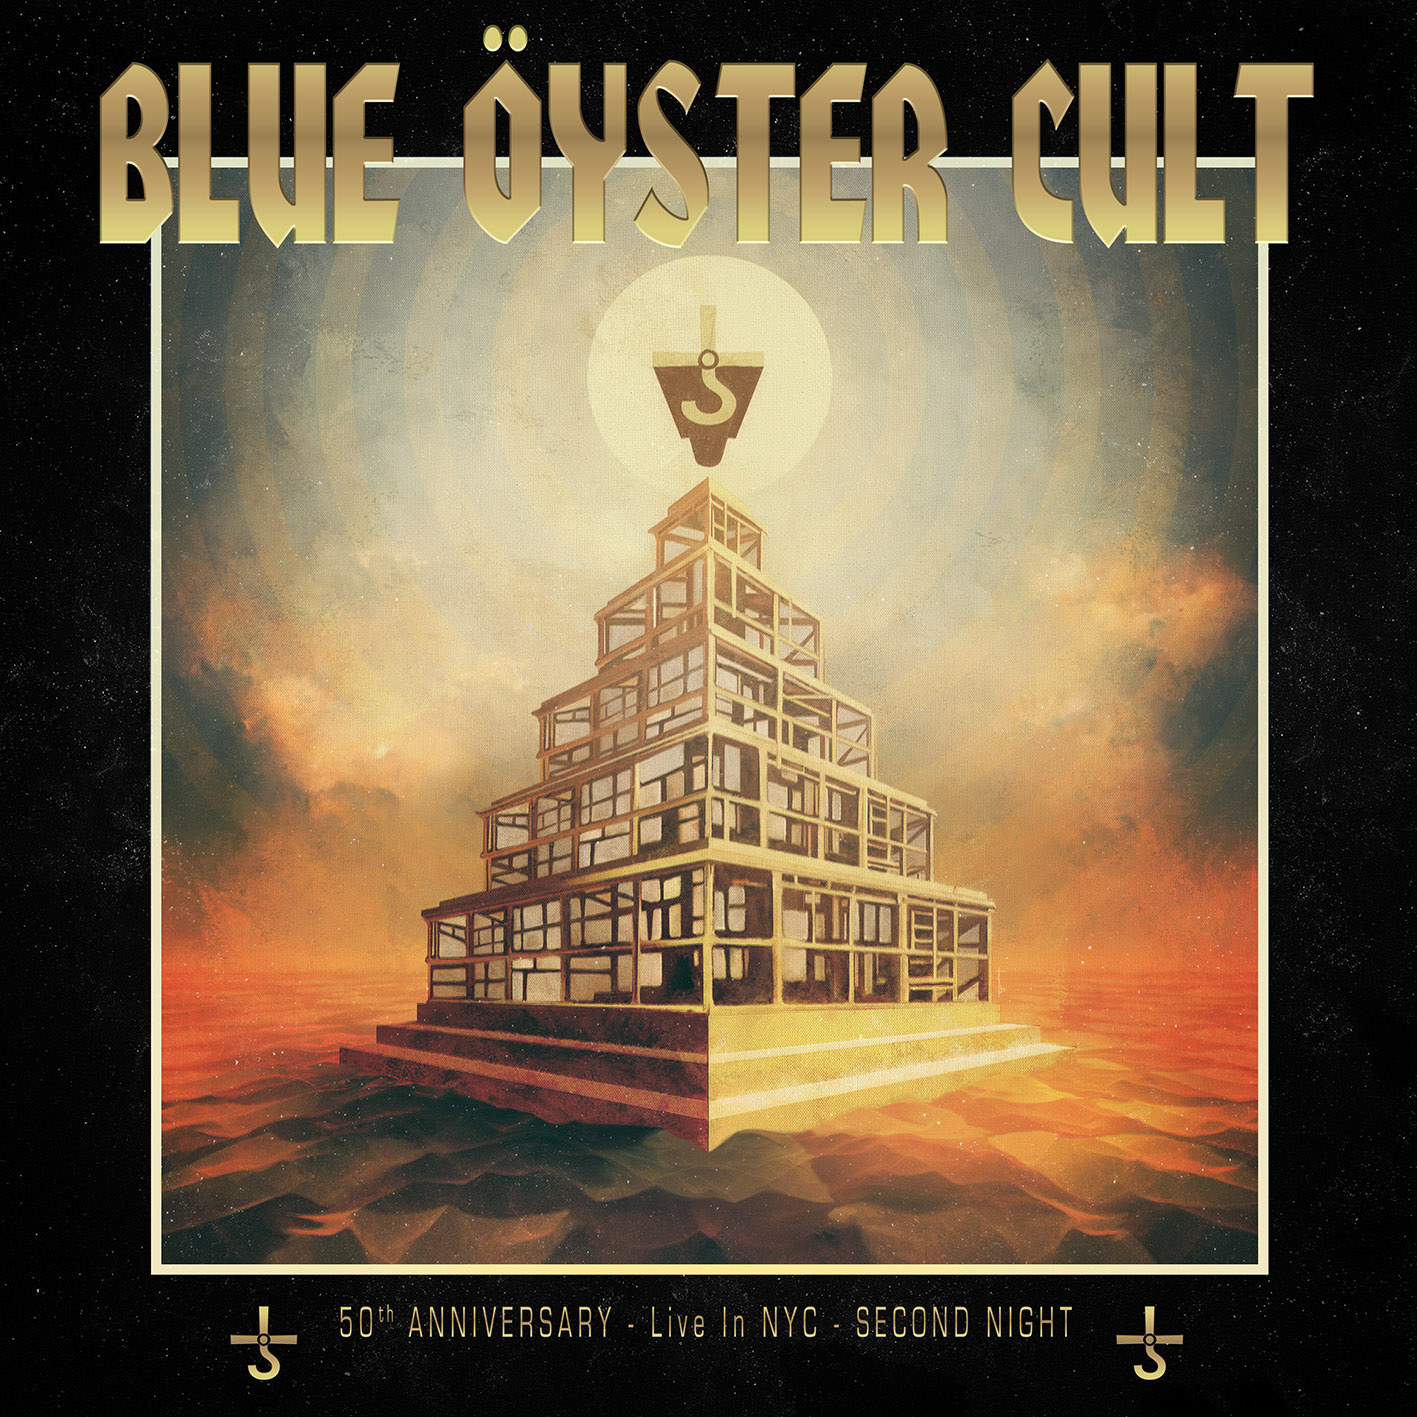 BLUE OYSTER CULT - 50th Anniversary Live – Second Night